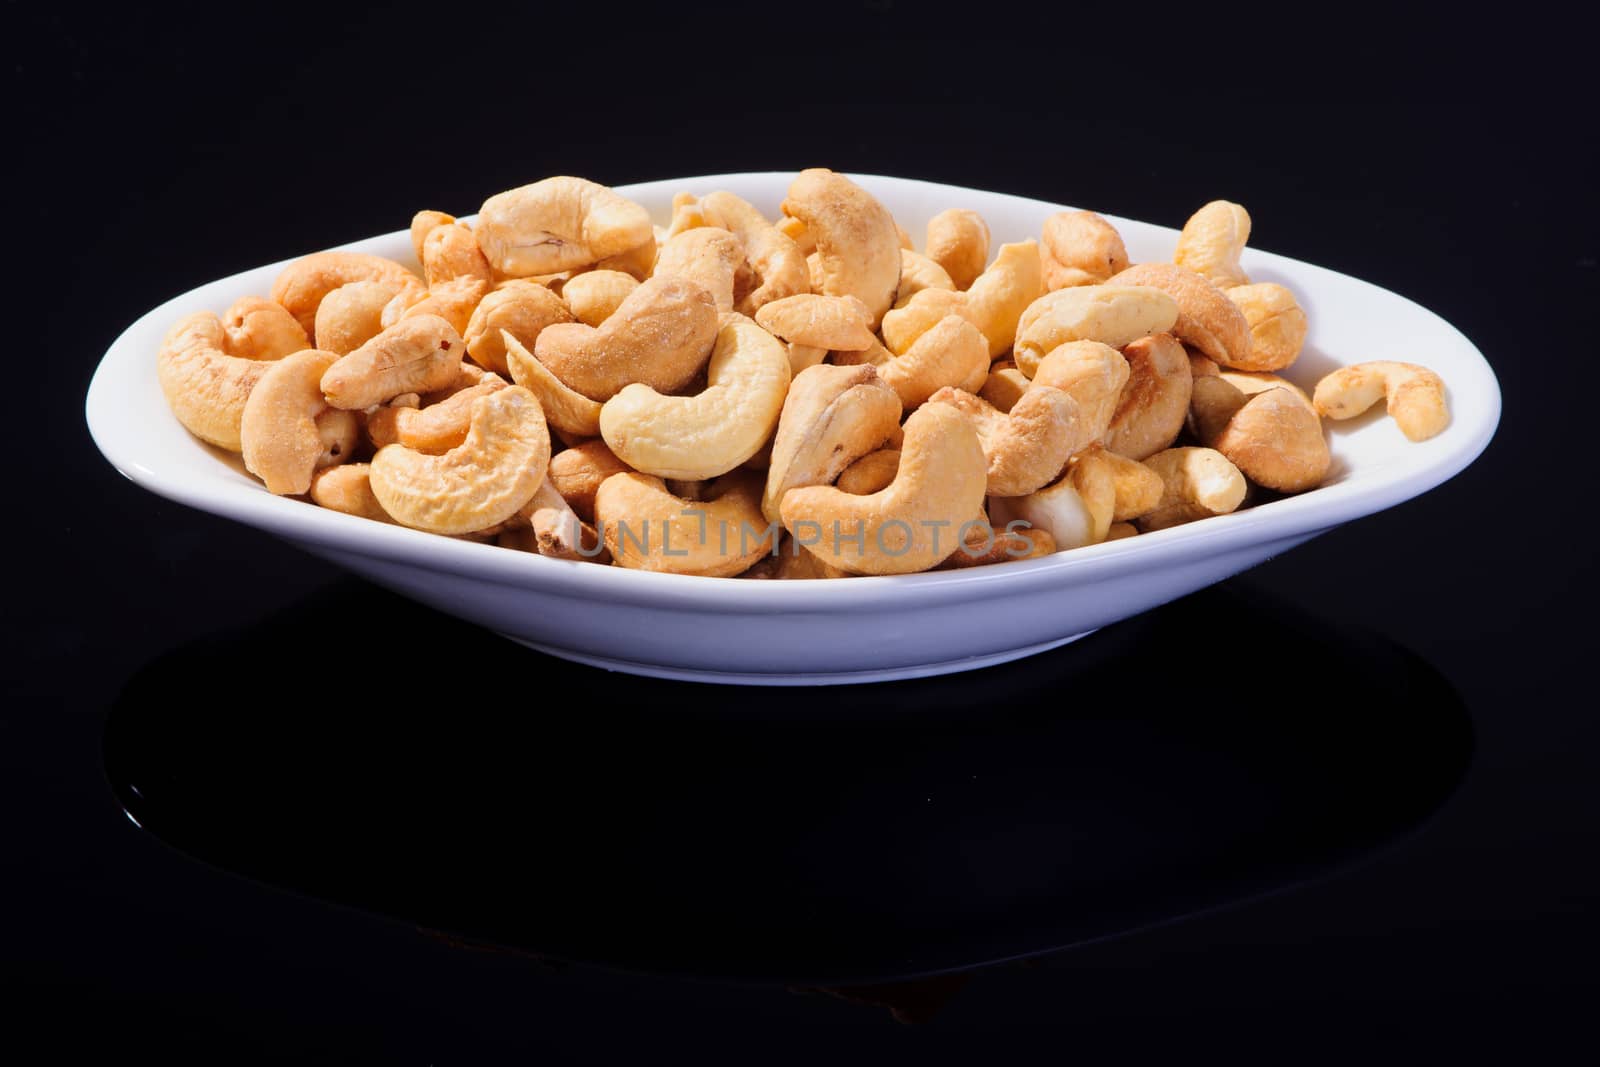 Salted Cashew Nuts in a white plate on a black background